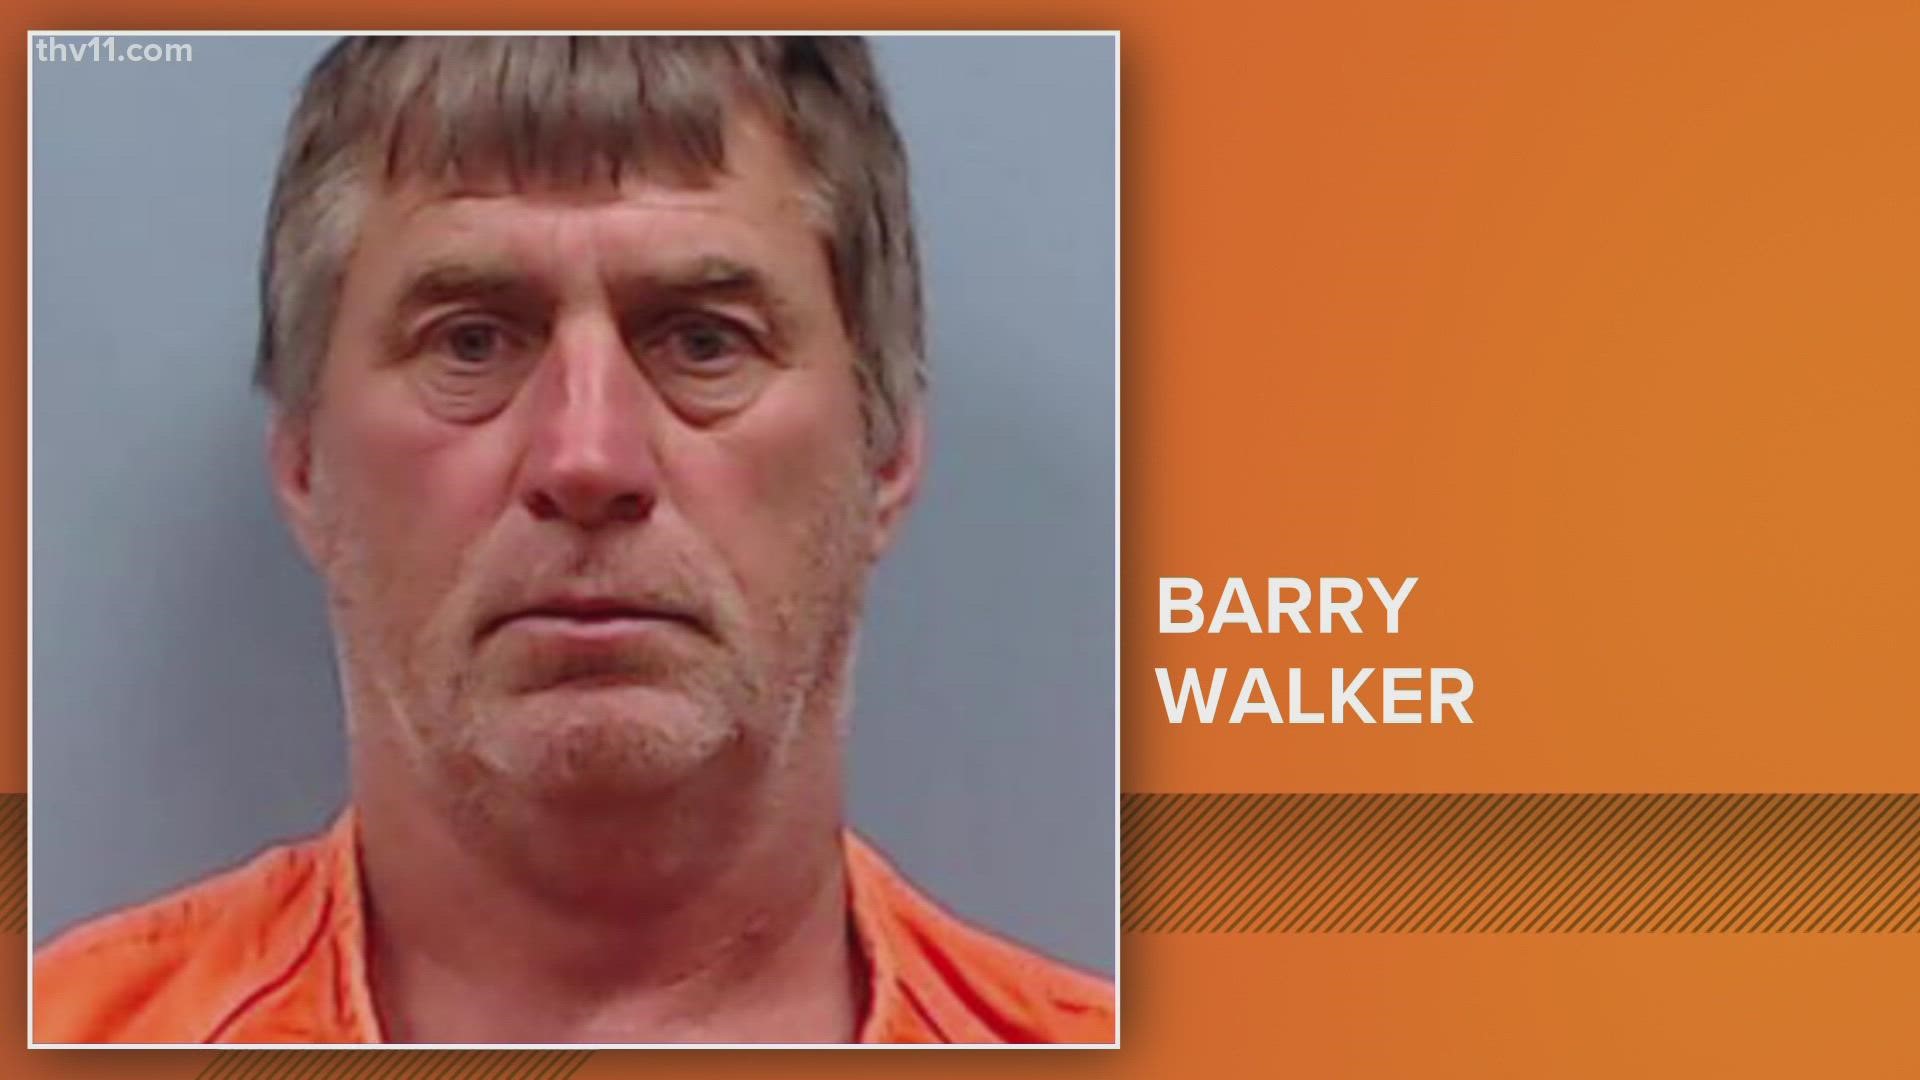 58-year-old Barry Walker was sentenced to 18 life sentences for sex crimes against minors. Walker is set to make another appearance in court on Thursday.